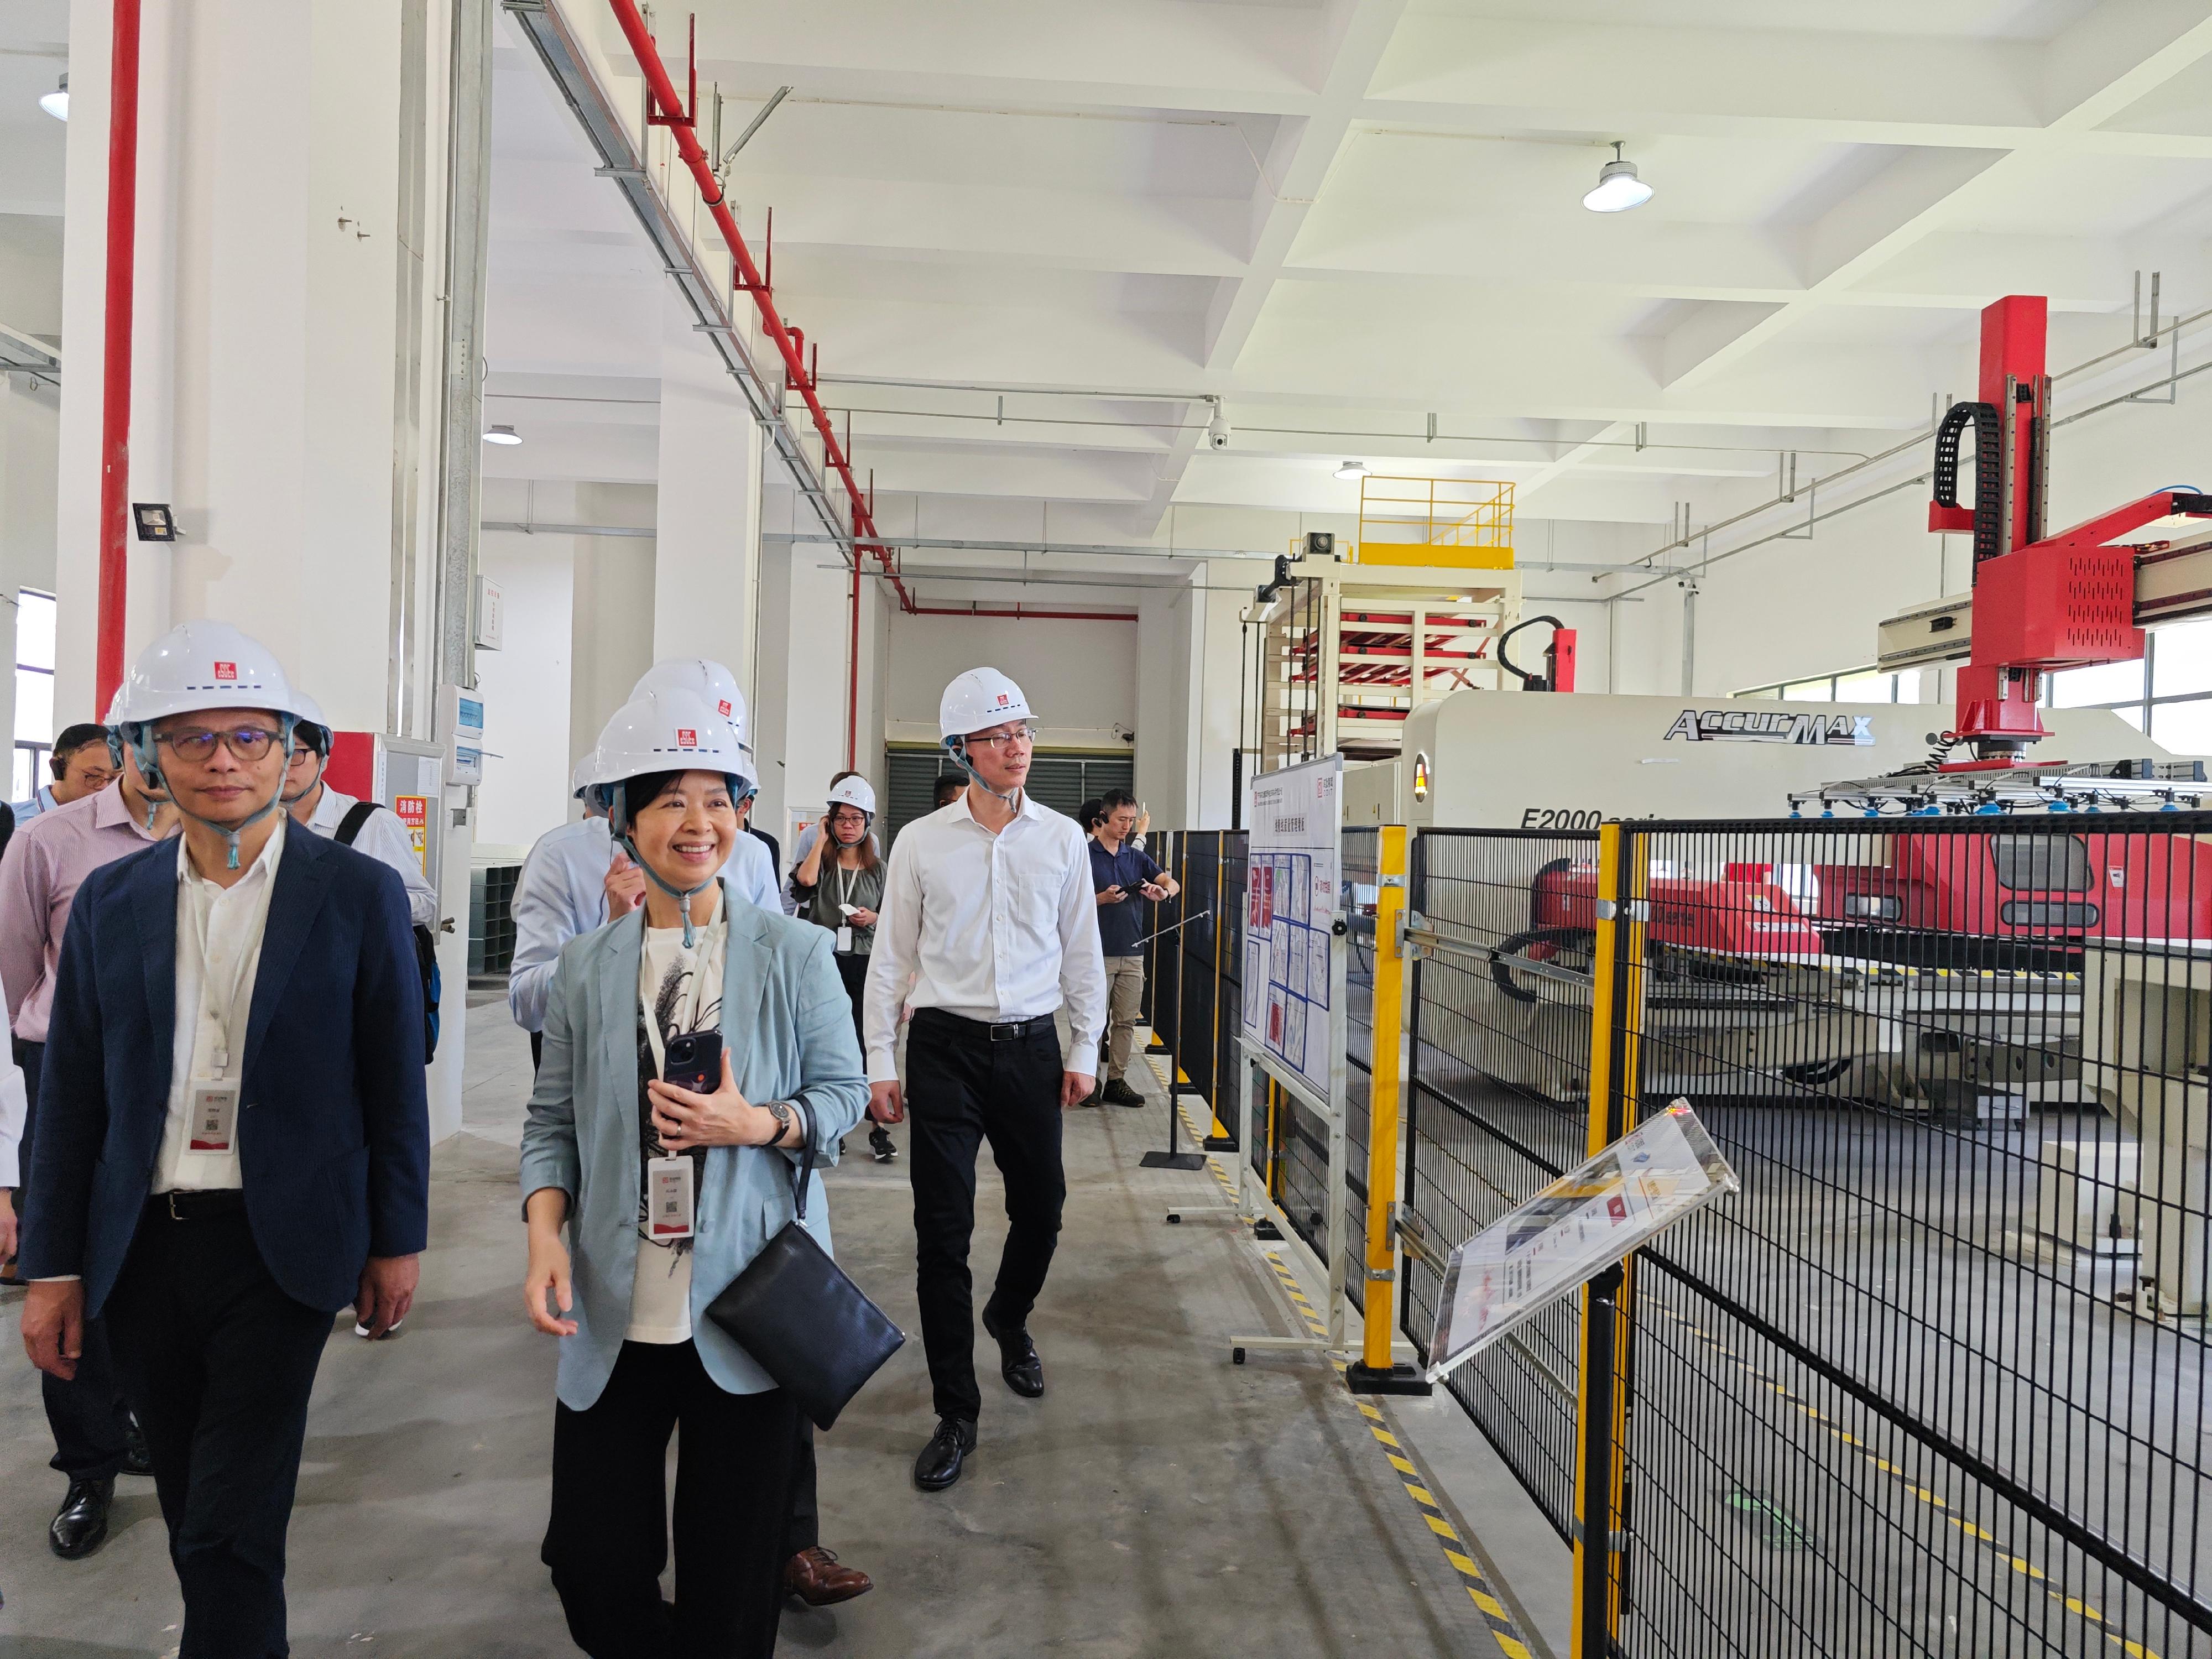 The Secretary for Housing, Ms Winnie Ho, and representatives of the Housing Department visited Zhuhai today (September 19) to get an understanding of the latest development of Multi-trade Integrated Mechanical, Electrical and Plumbing (MiMEP) in the Guangdong-Hong Kong-Macao Greater Bay Area, as well as the application of this innovative and efficient construction technology in Hong Kong's public housing projects. Photo shows Ms Ho (second left) visiting the digital pavilion and production lines of the China Overseas Innovation & Technology (Zhuhai) Company Limited.